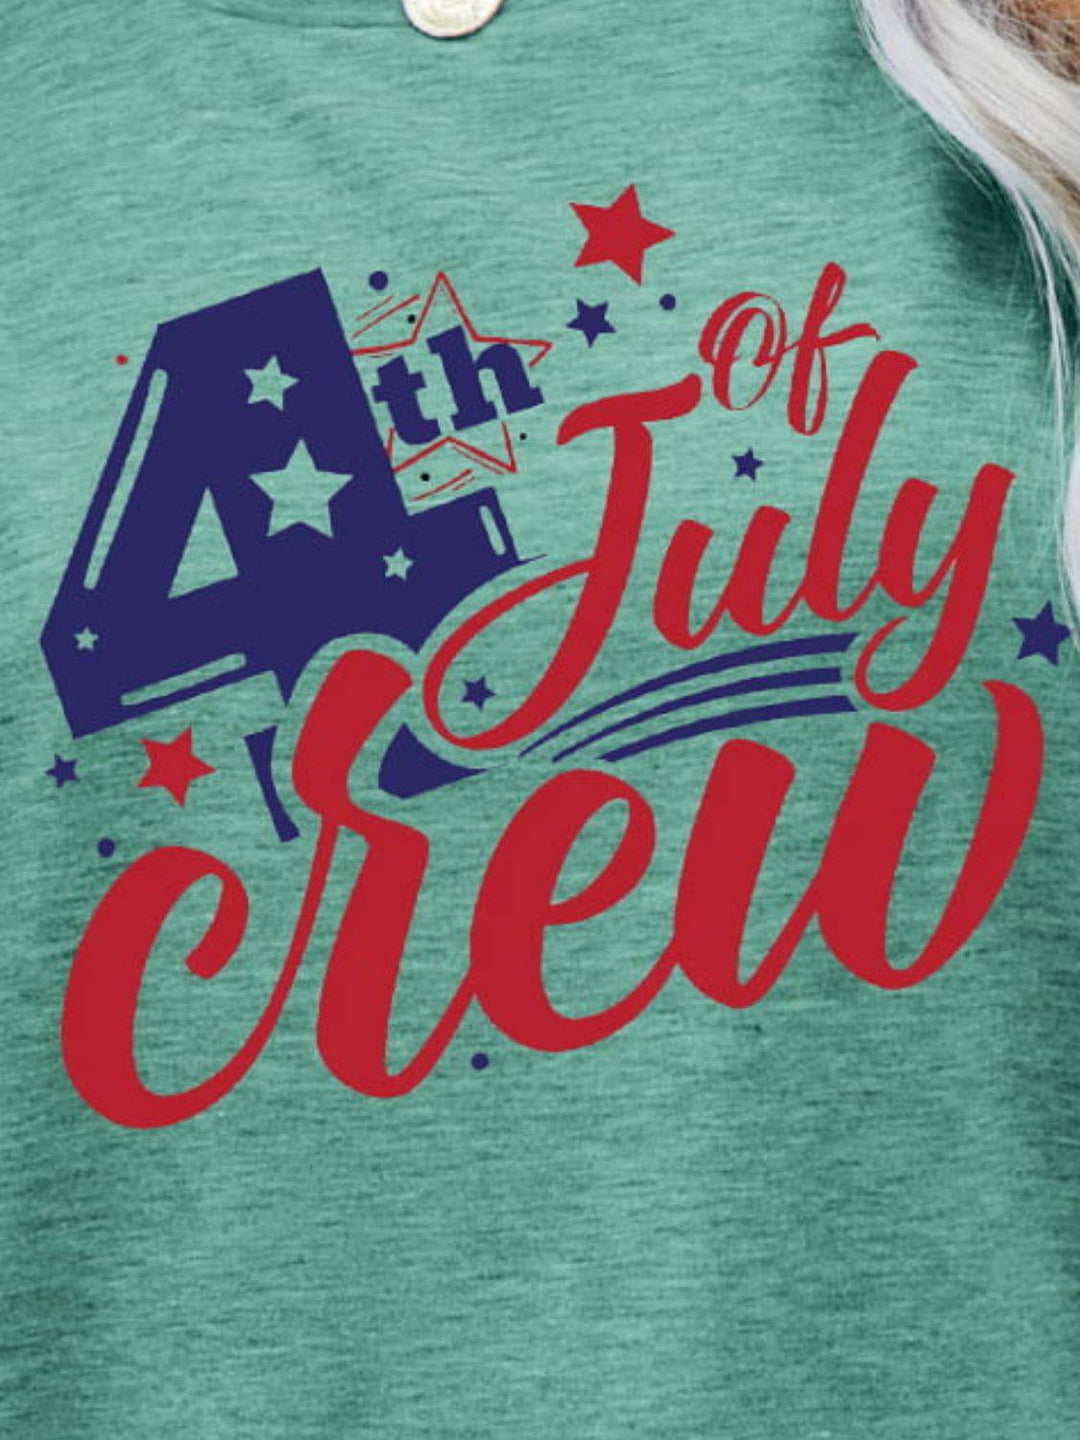 a woman wearing a fourth of july crew t - shirt